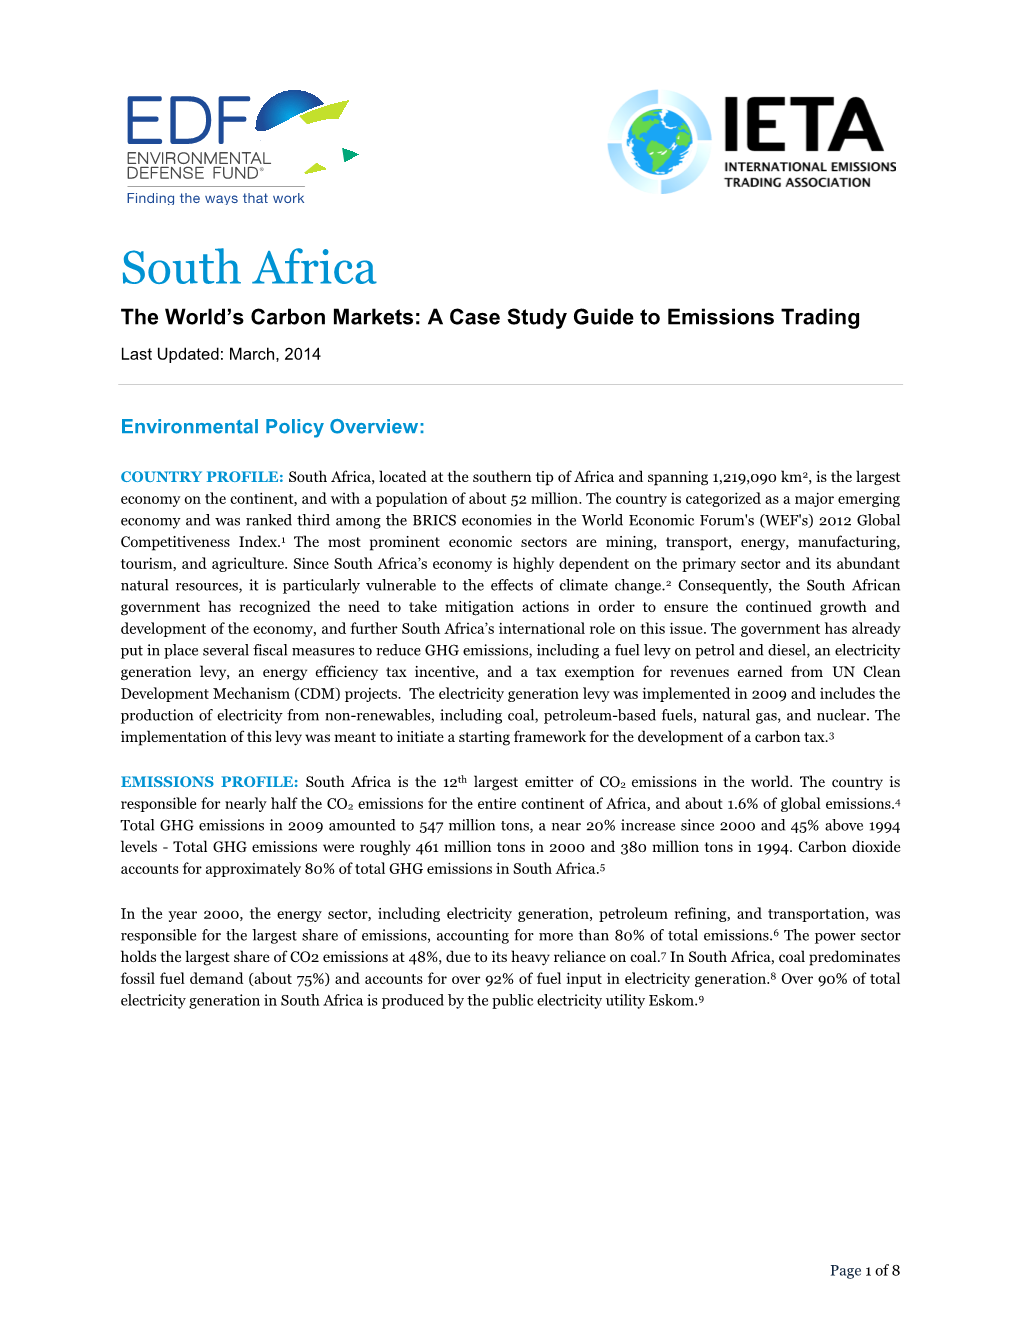 South Africa the World’S Carbon Markets: a Case Study Guide to Emissions Trading